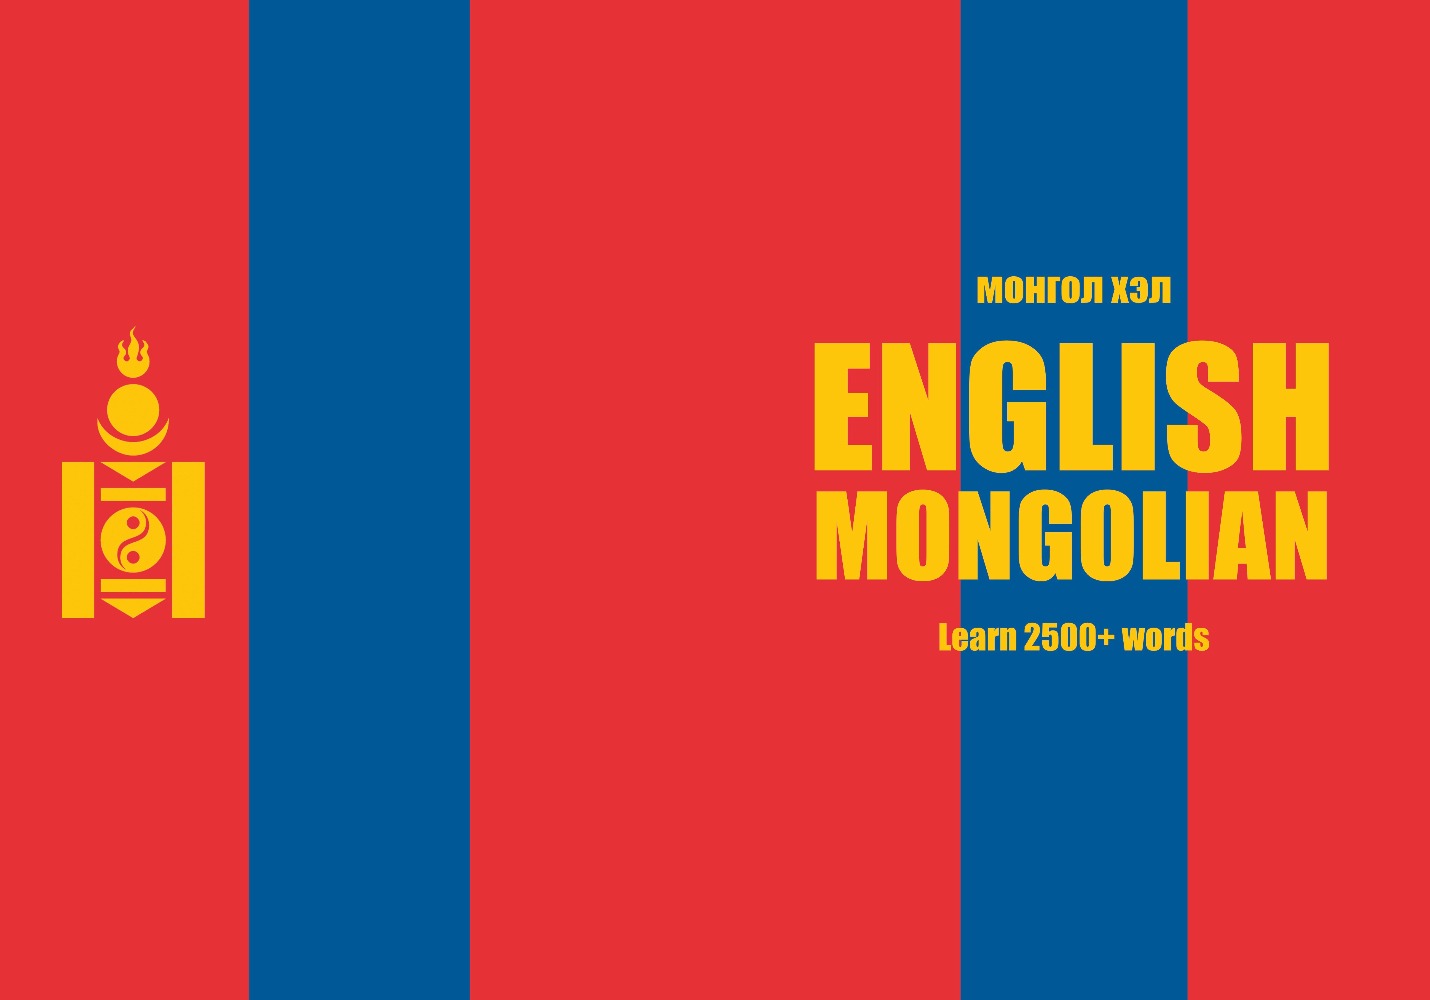 Mongolian language learning notebook cover